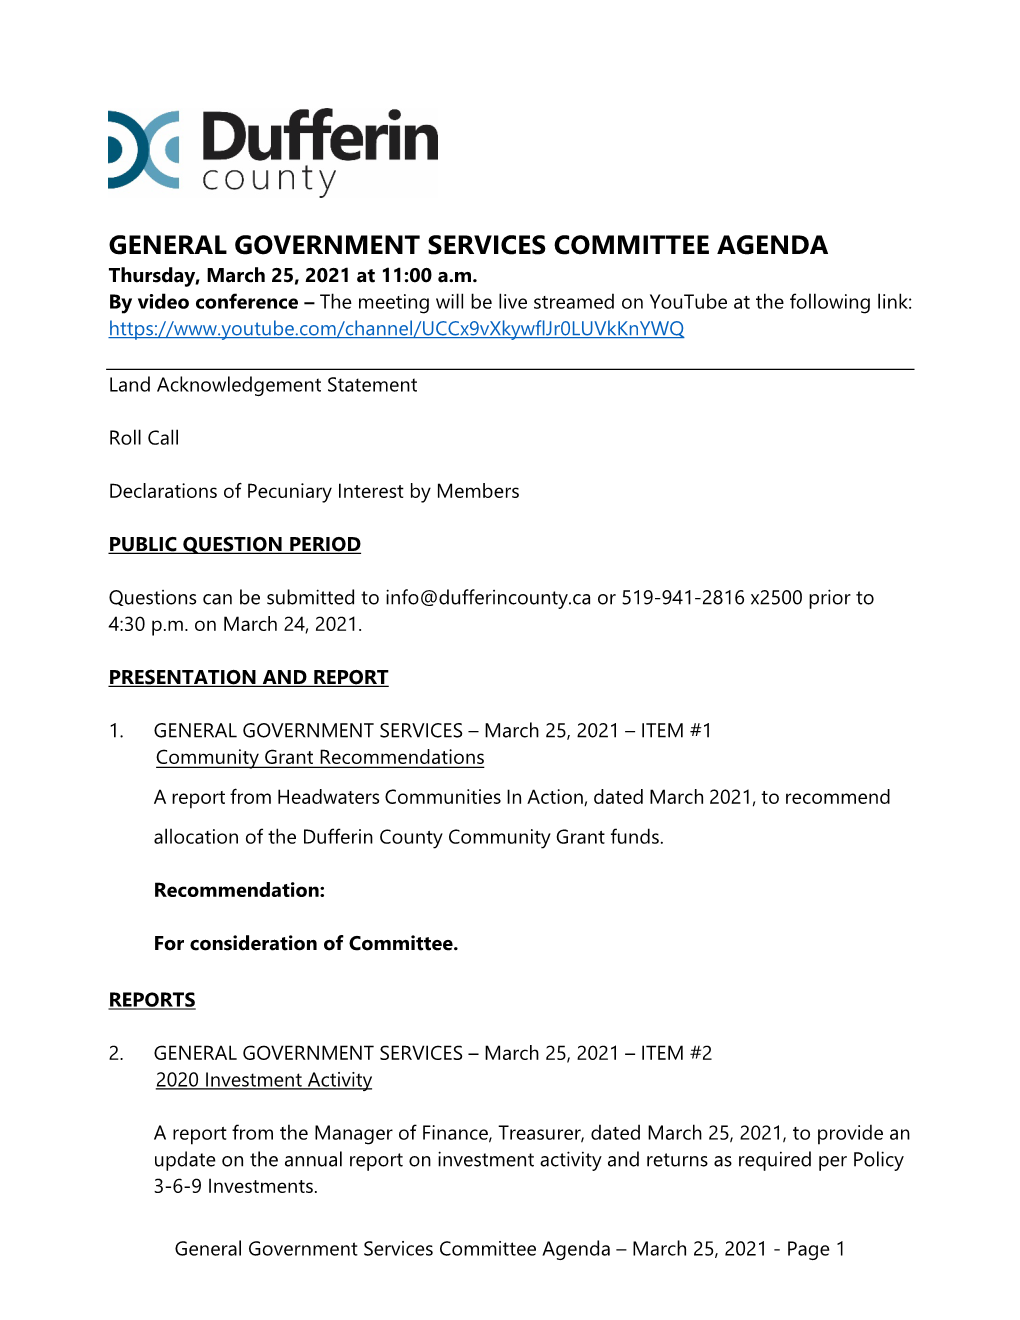 GENERAL GOVERNMENT SERVICES COMMITTEE AGENDA Thursday, March 25, 2021 at 11:00 A.M